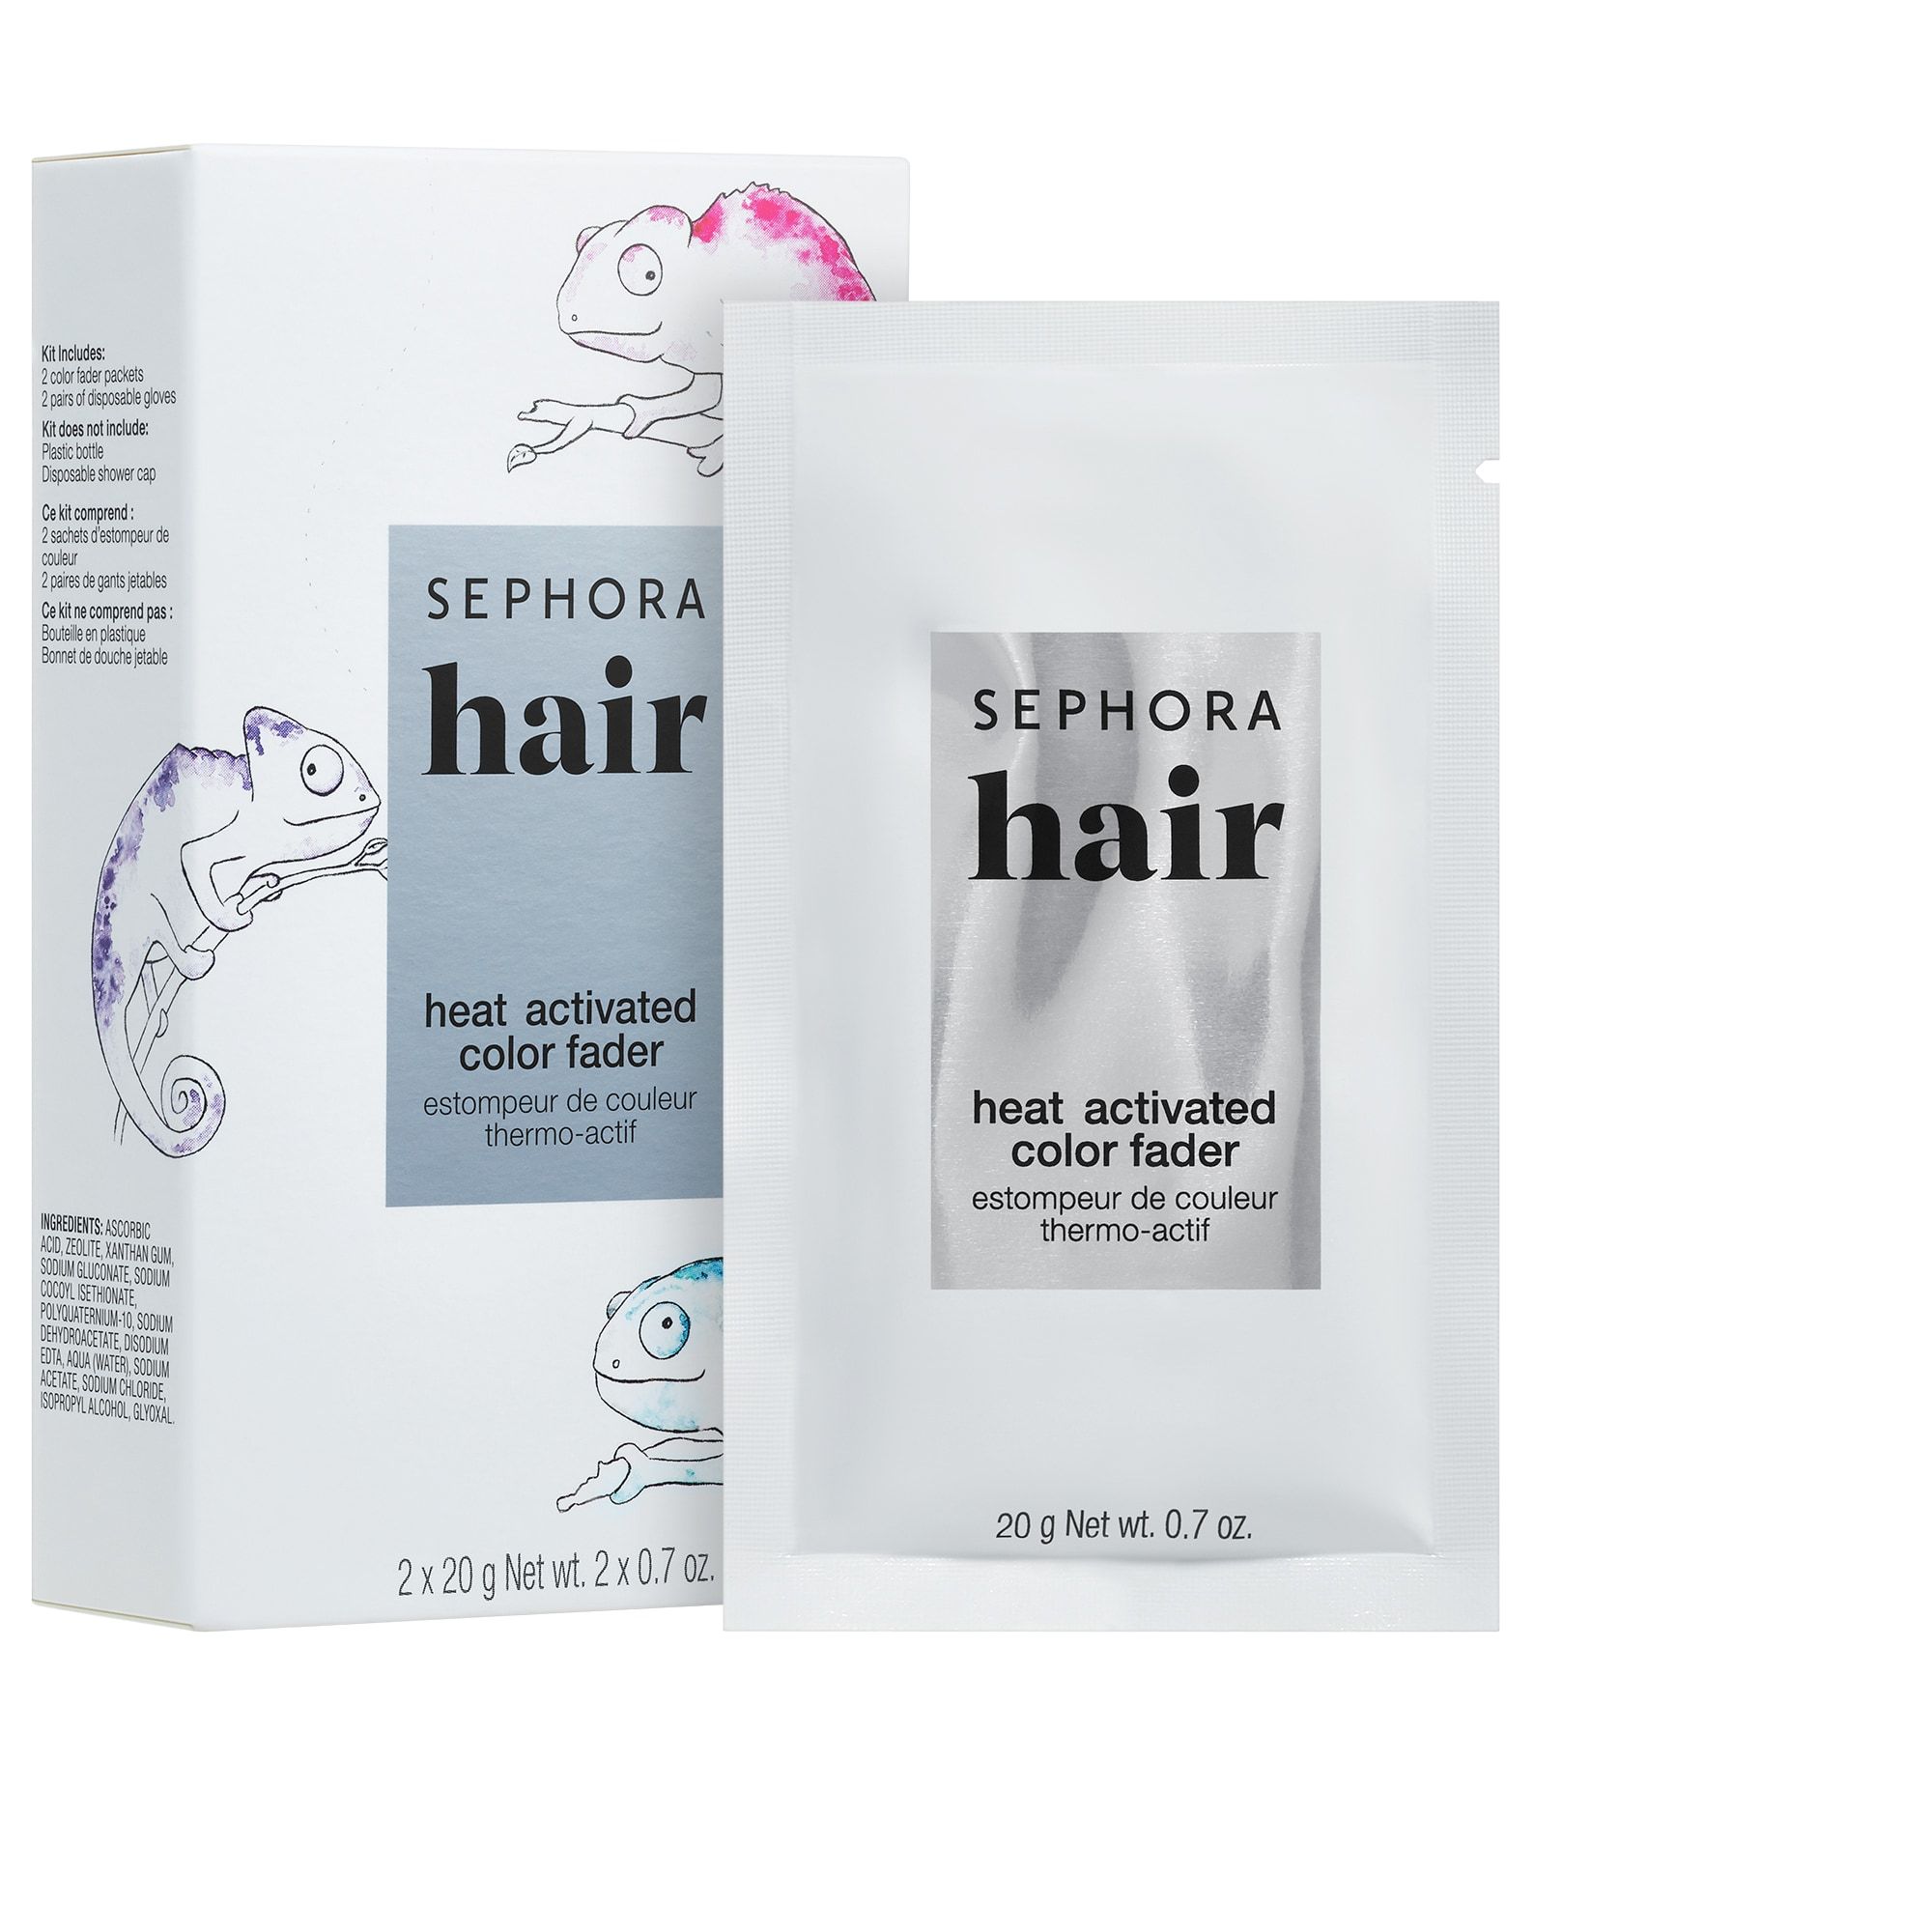 8 Best Hair Color Removers of 2022 - Best Hair Dye Corrector